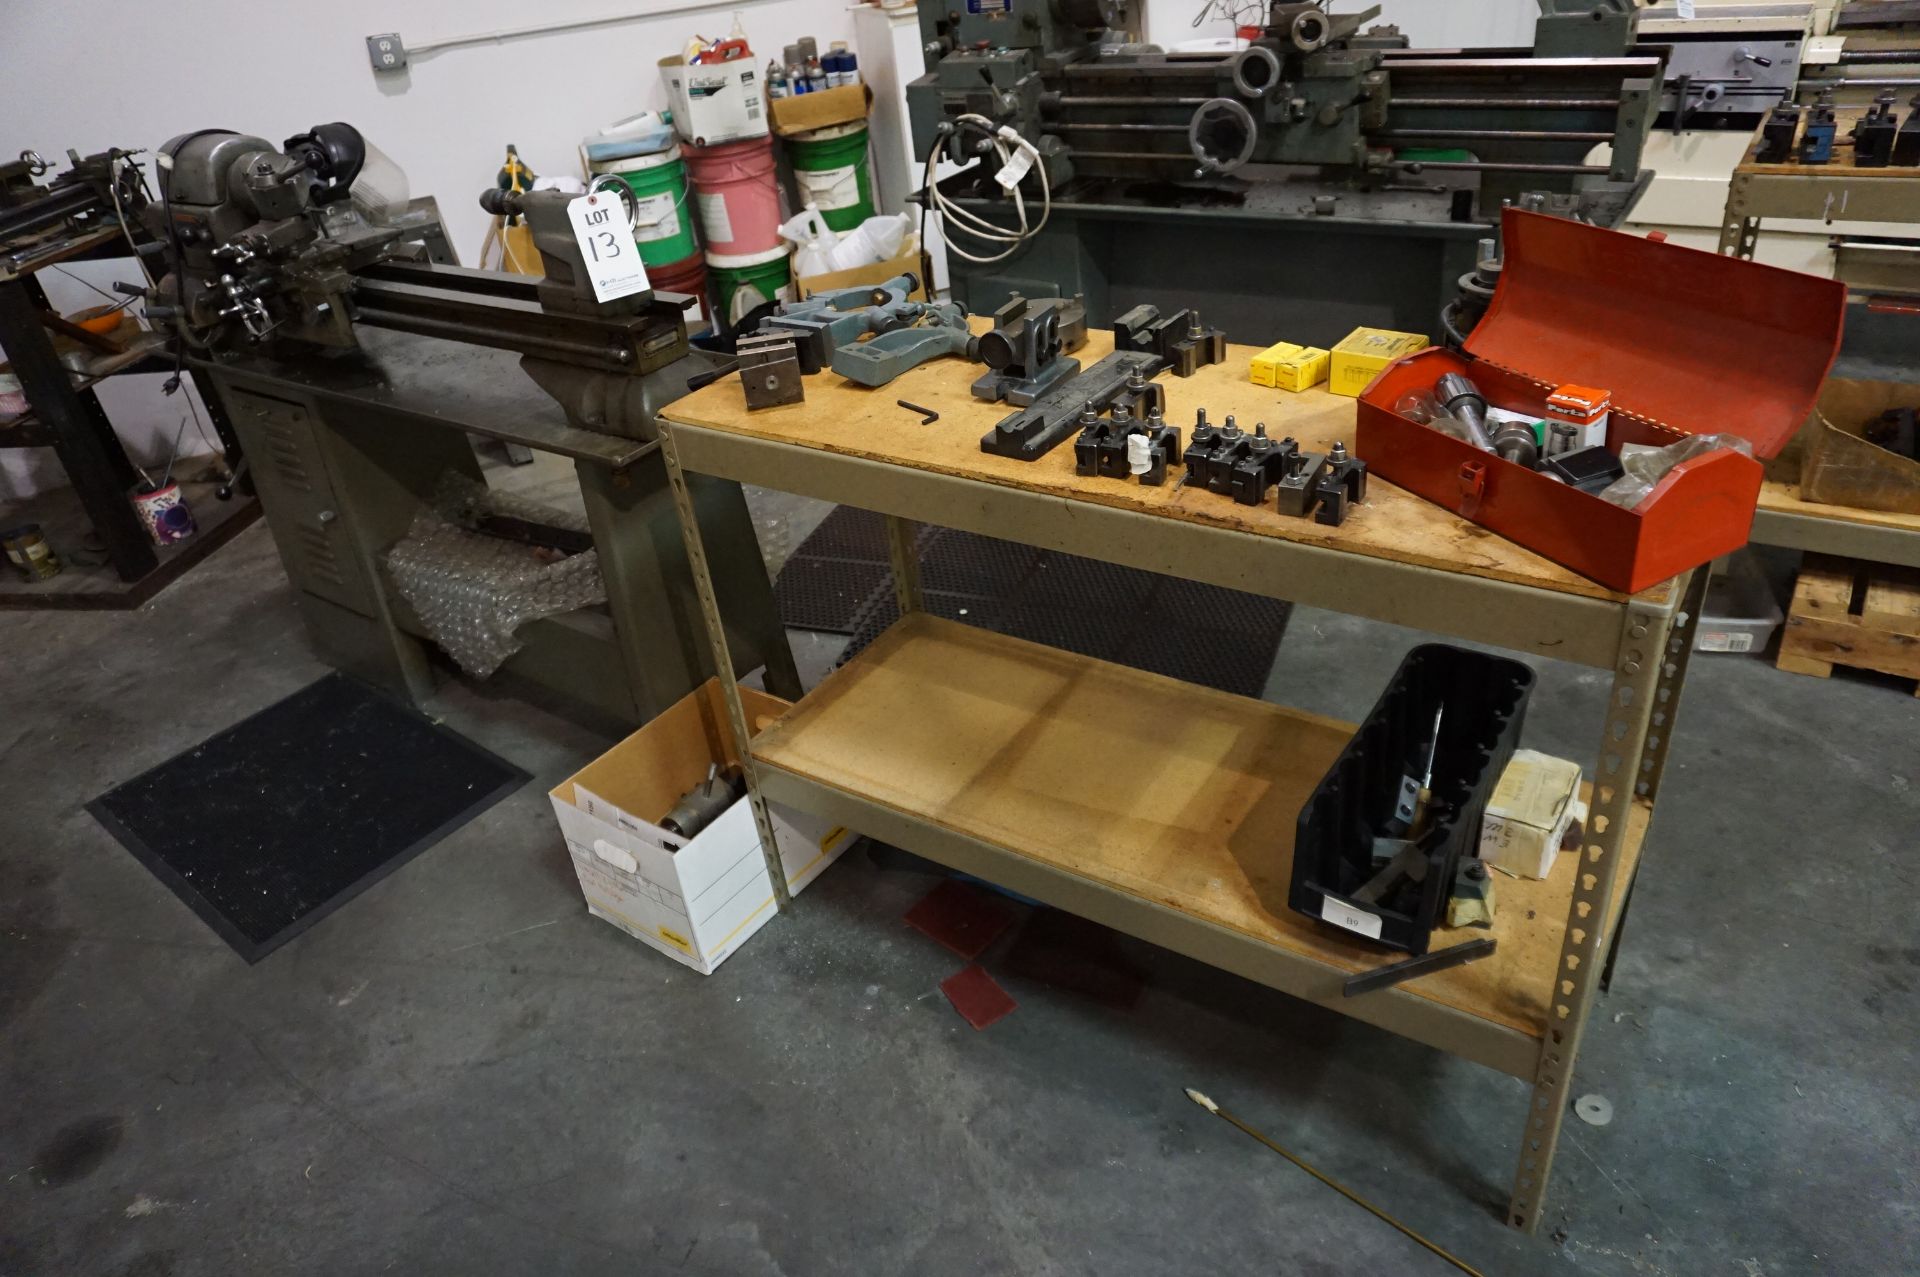 SEARS CRAFTSMAN MACHINE LATHE, MODEL 101 28990, S/N 108777, 12" X 36" BED, TO INCLUDE: TOOL HOLDERS,